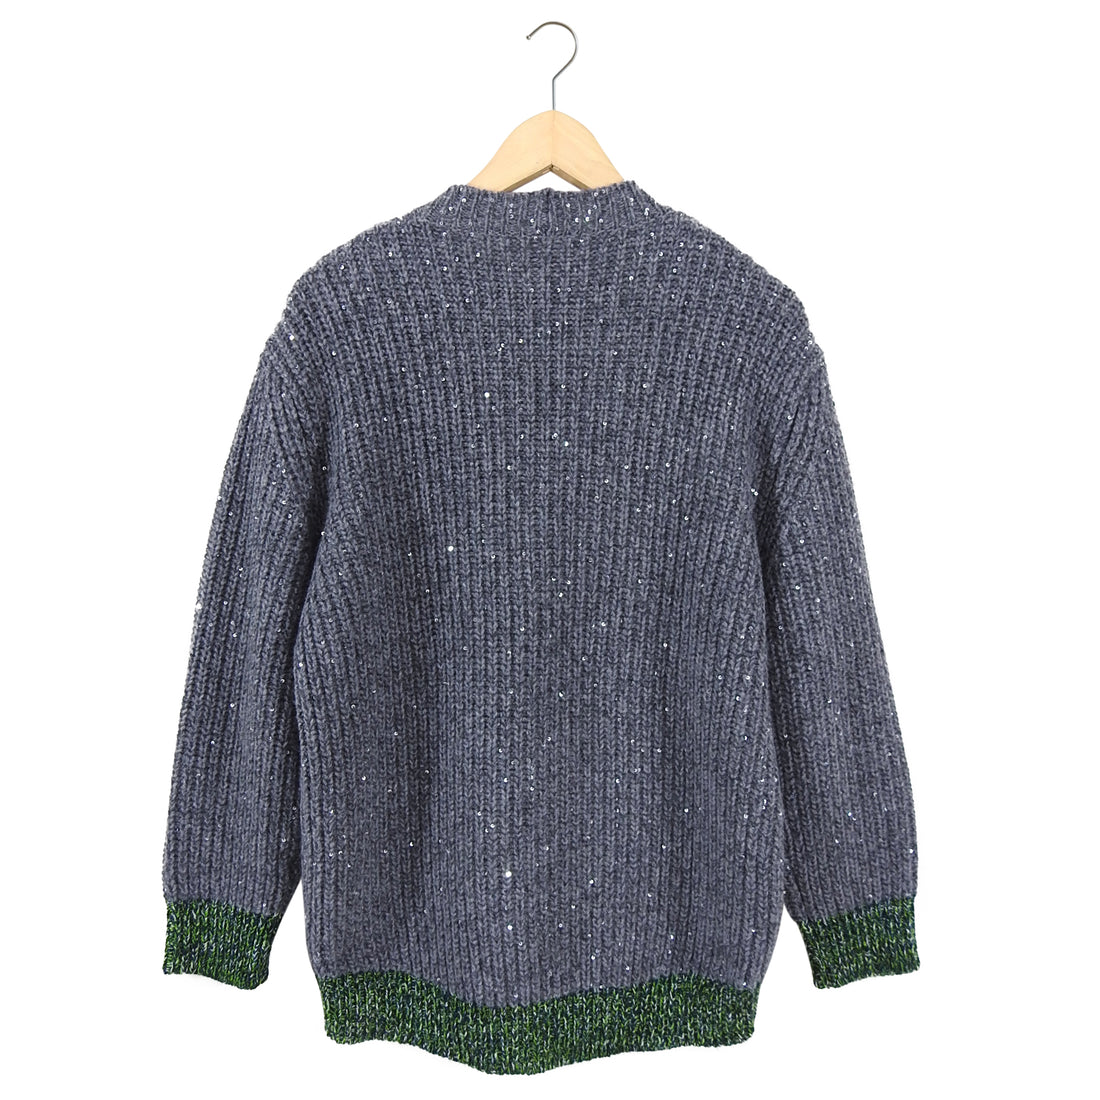 No 21 Grey Chunky Knit Sweater with Green Hem - S